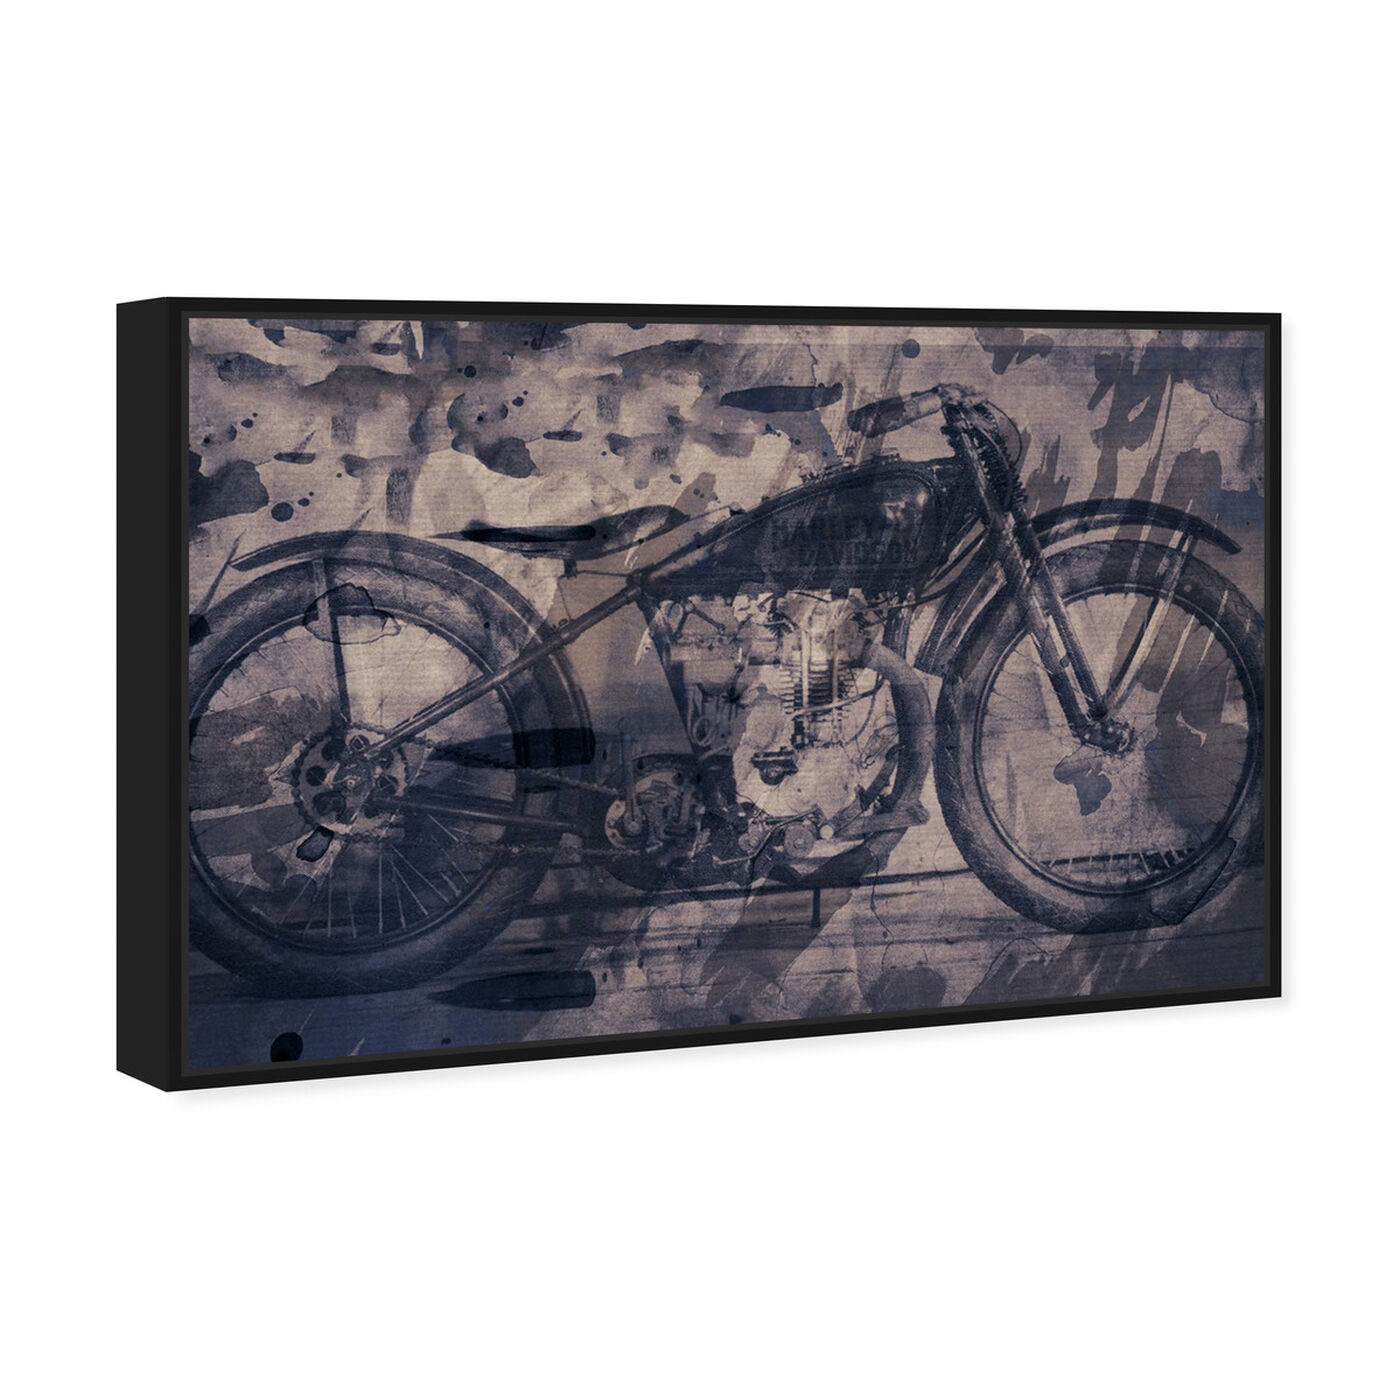 Angled view of Vintage Bike featuring transportation and motorcycles art.